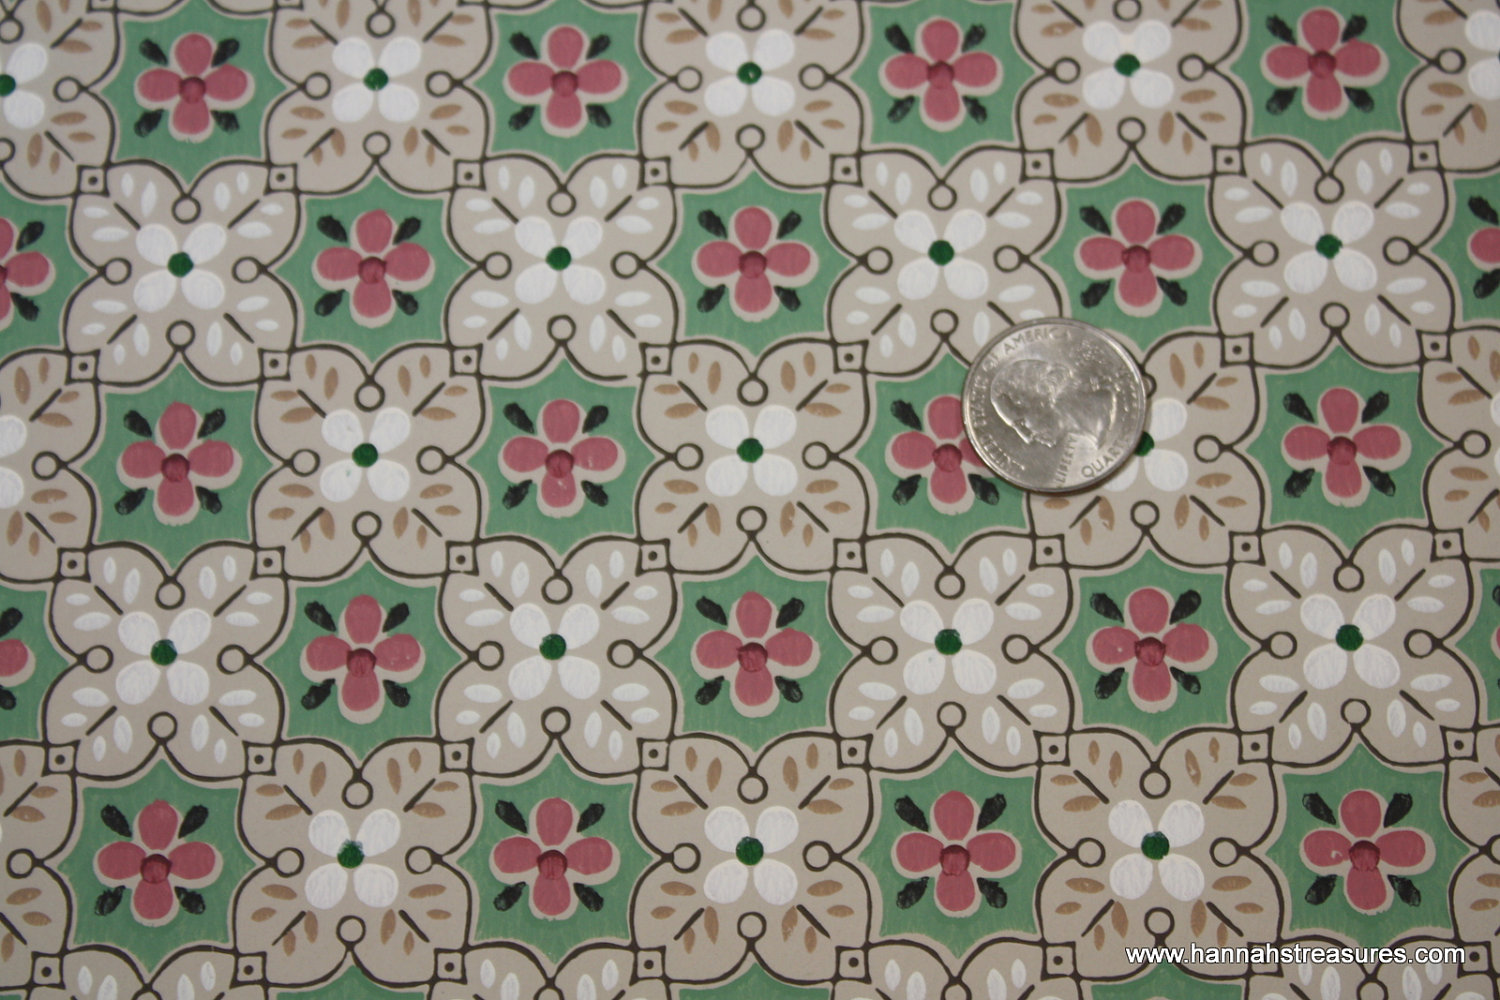 S Vintage Wallpaper Pink Green White And By Hannahstreasures